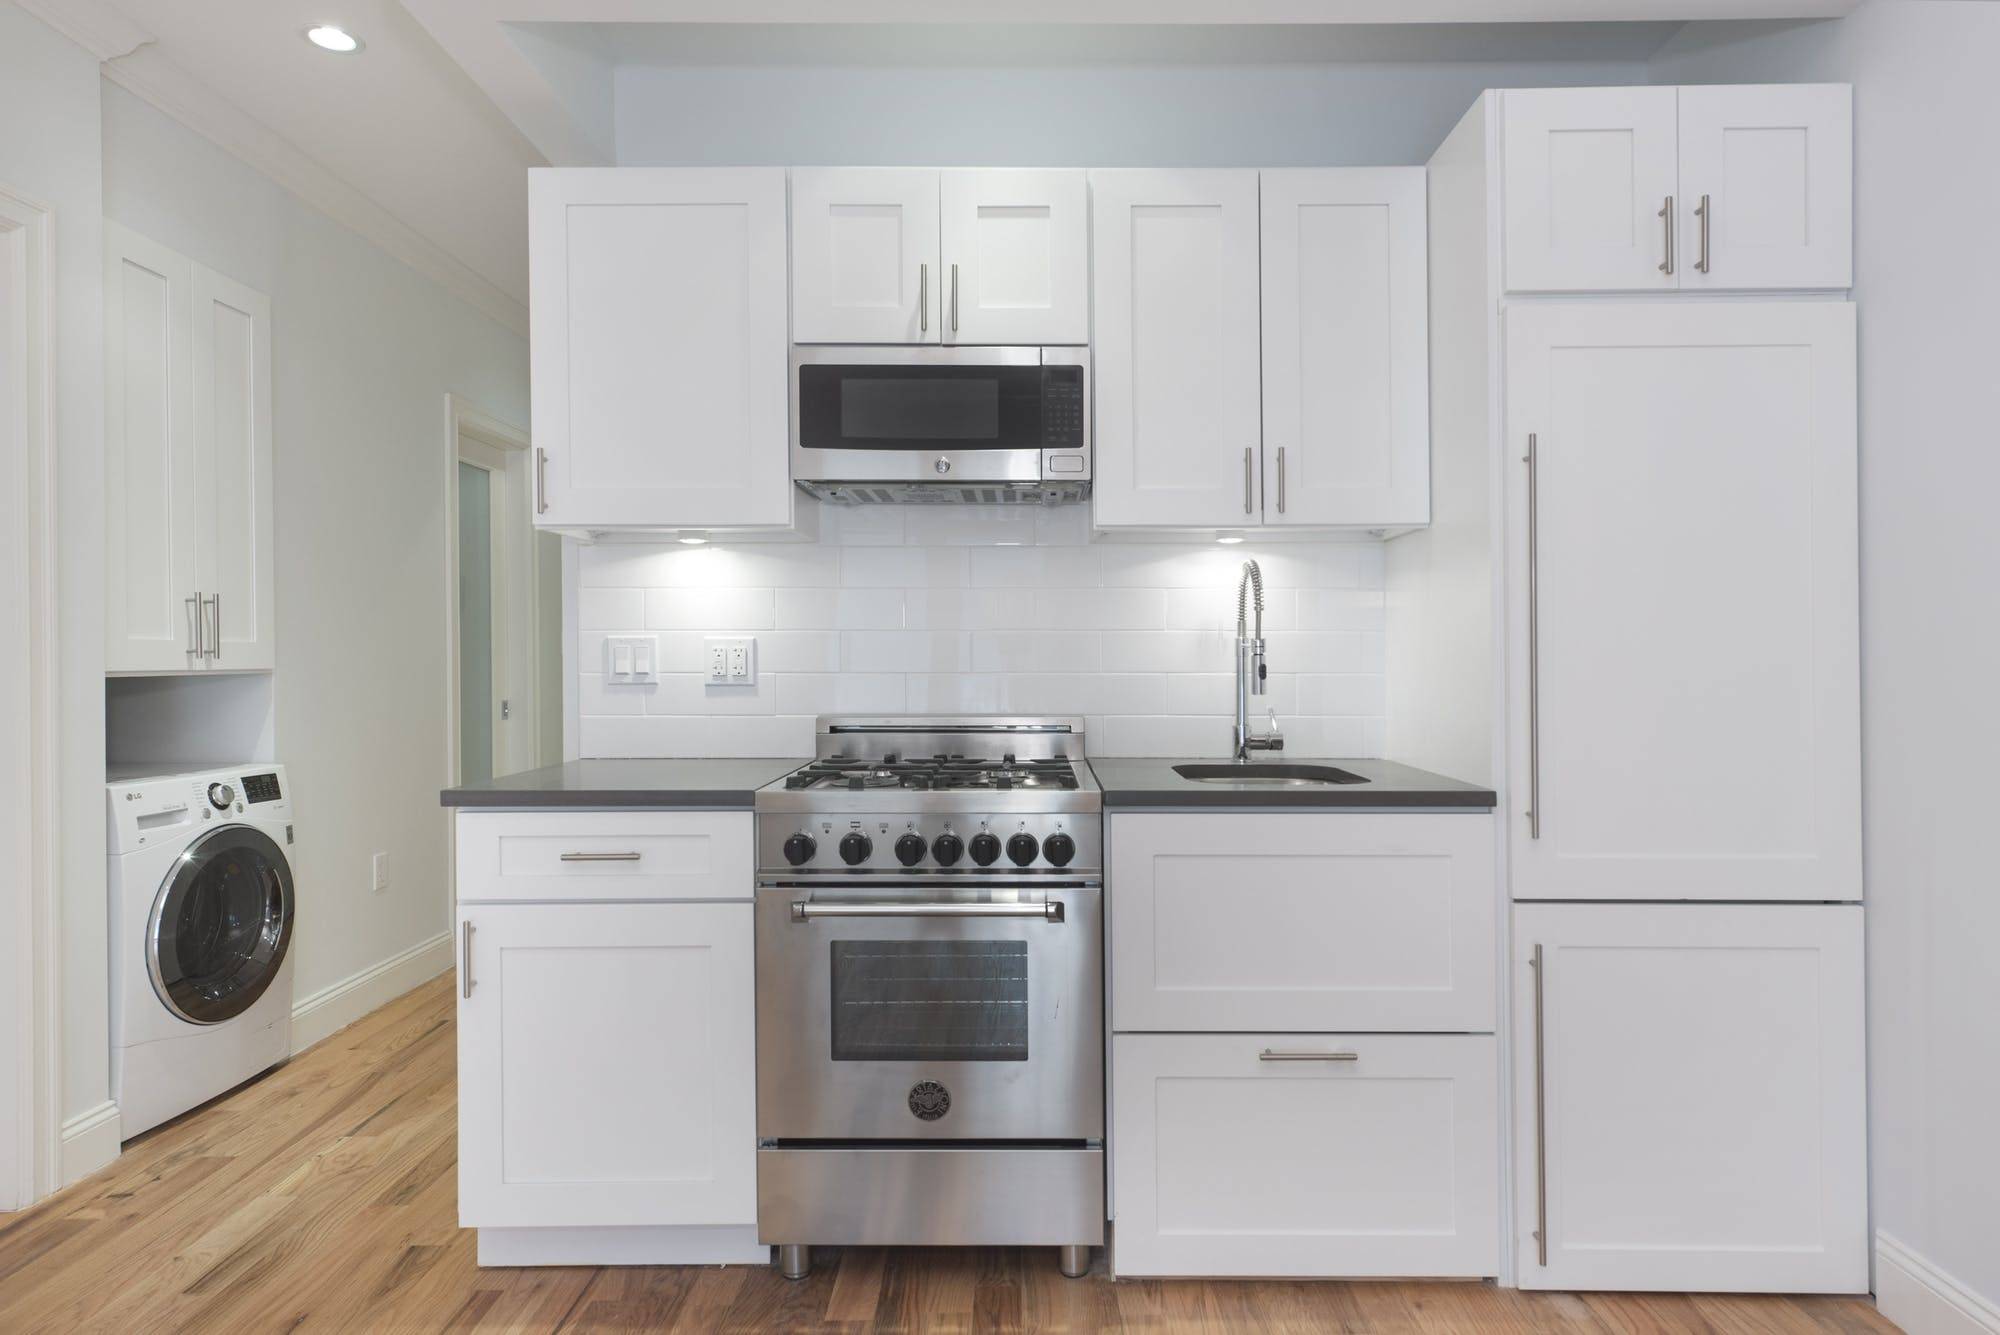 No Fee 1. 5 Months Free Rent Come view this beautifully renovated 3 bedroom apartment, located in Hell's Kitchen.